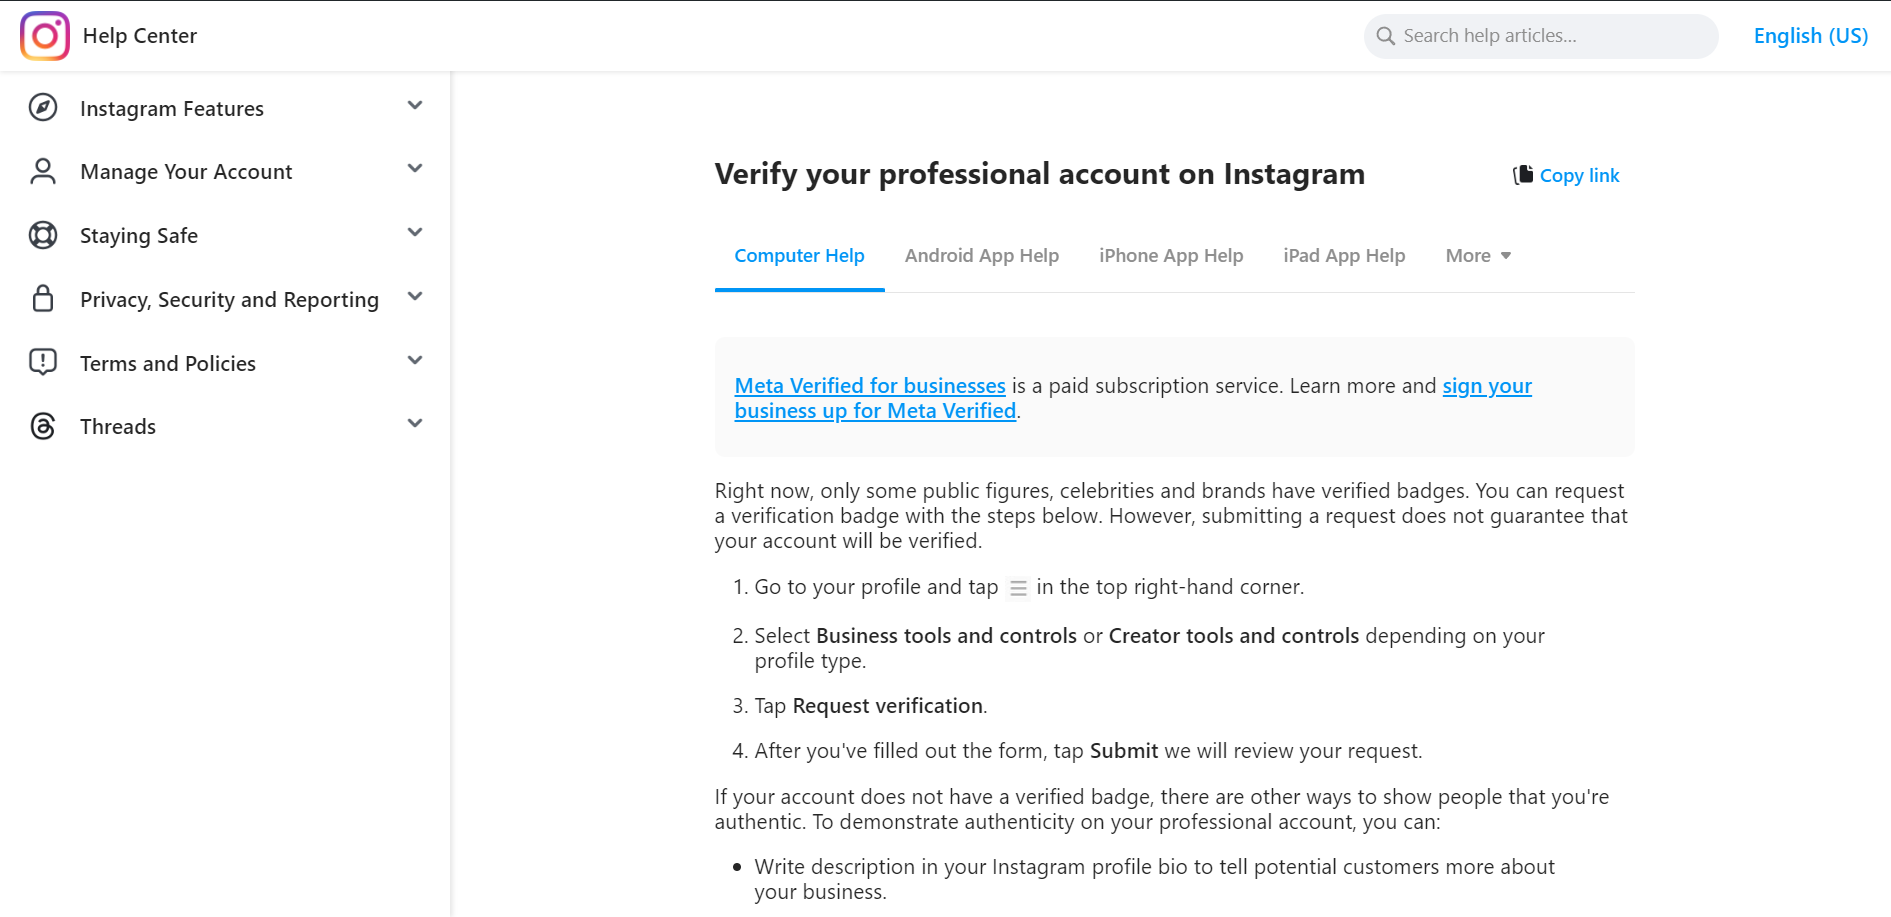 Verifying your professional account on Instagram